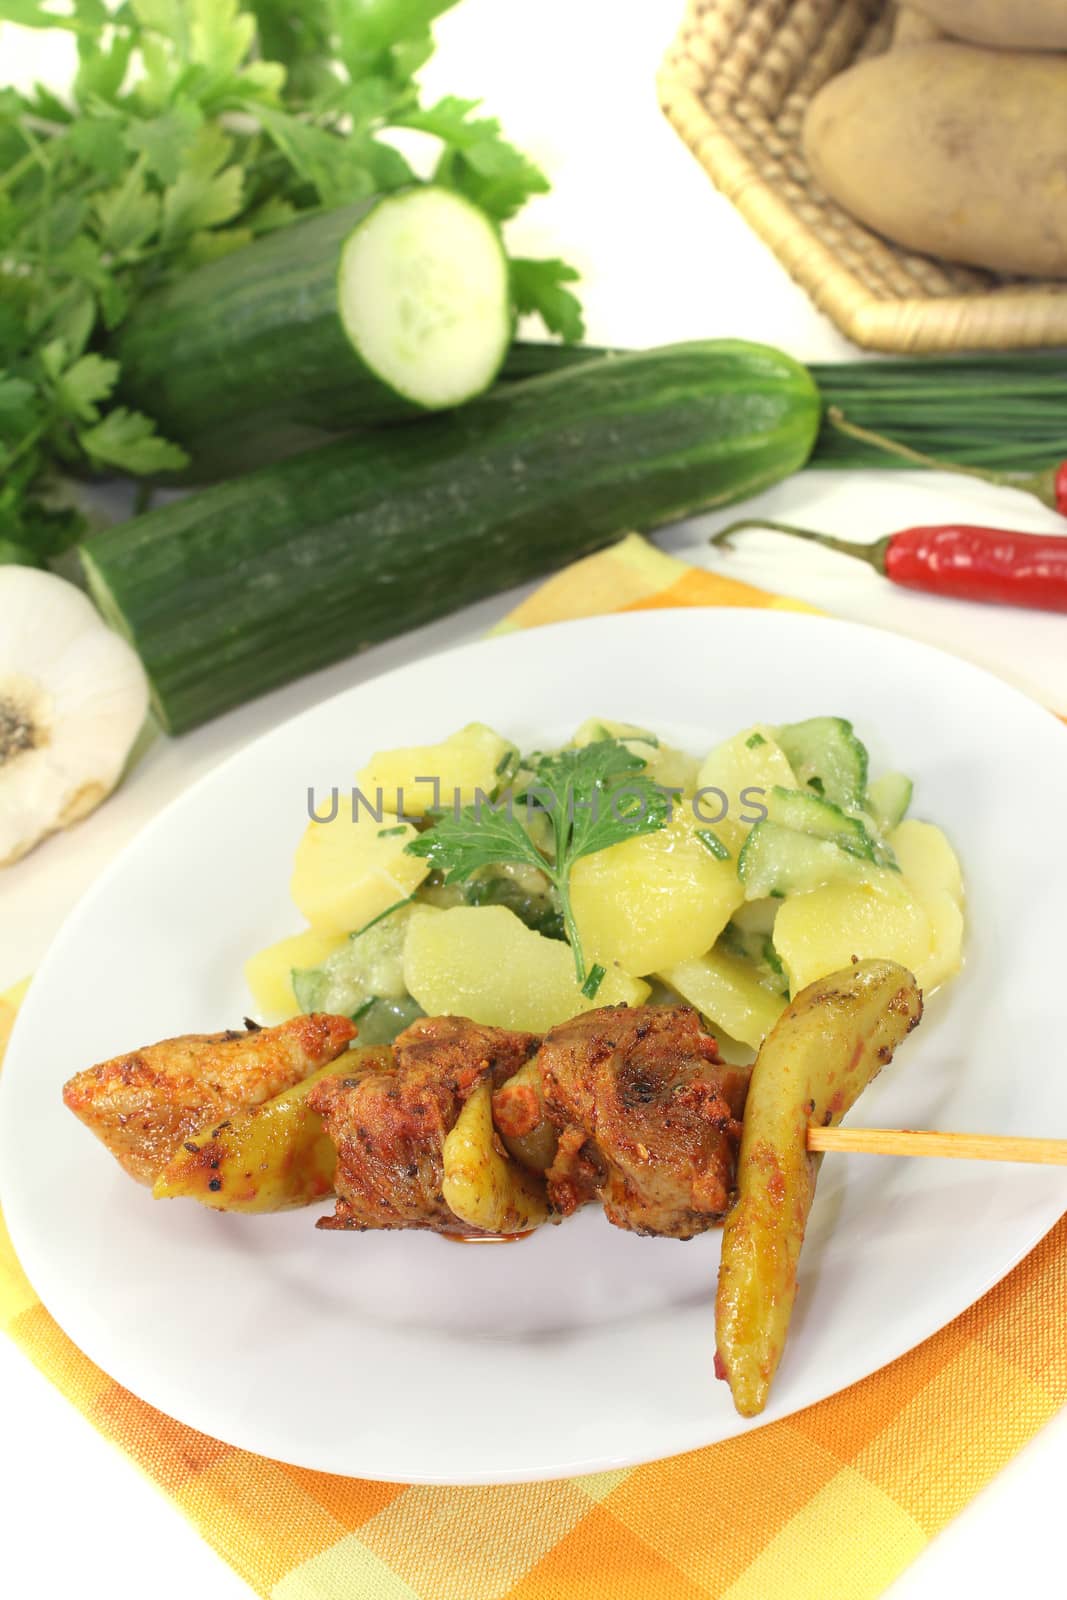 Potato-cucumber salad with fire skewers of pork by discovery